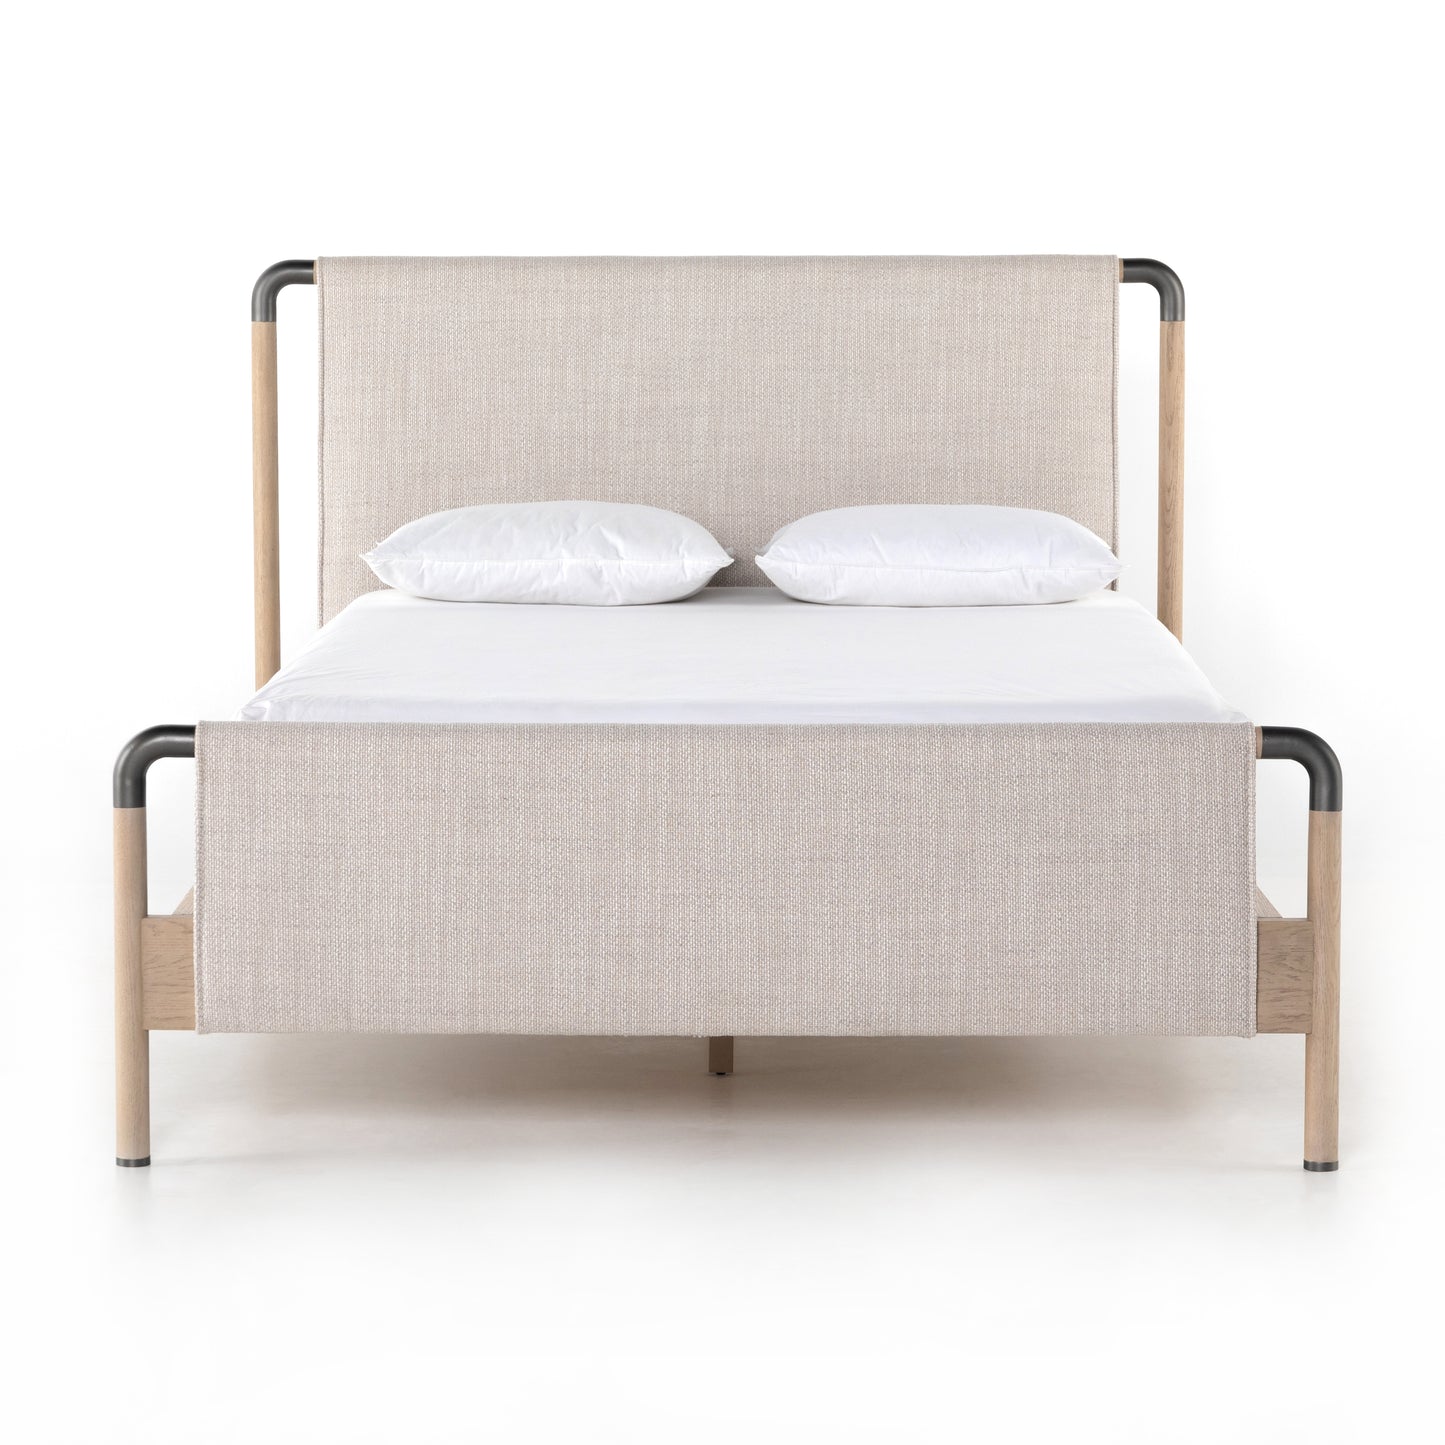 Load image into Gallery viewer, Harriett Bed Bed Four Hands     Four Hands, Mid Century Modern Furniture, Old Bones Furniture Company, Old Bones Co, Modern Mid Century, Designer Furniture, https://www.oldbonesco.com/
